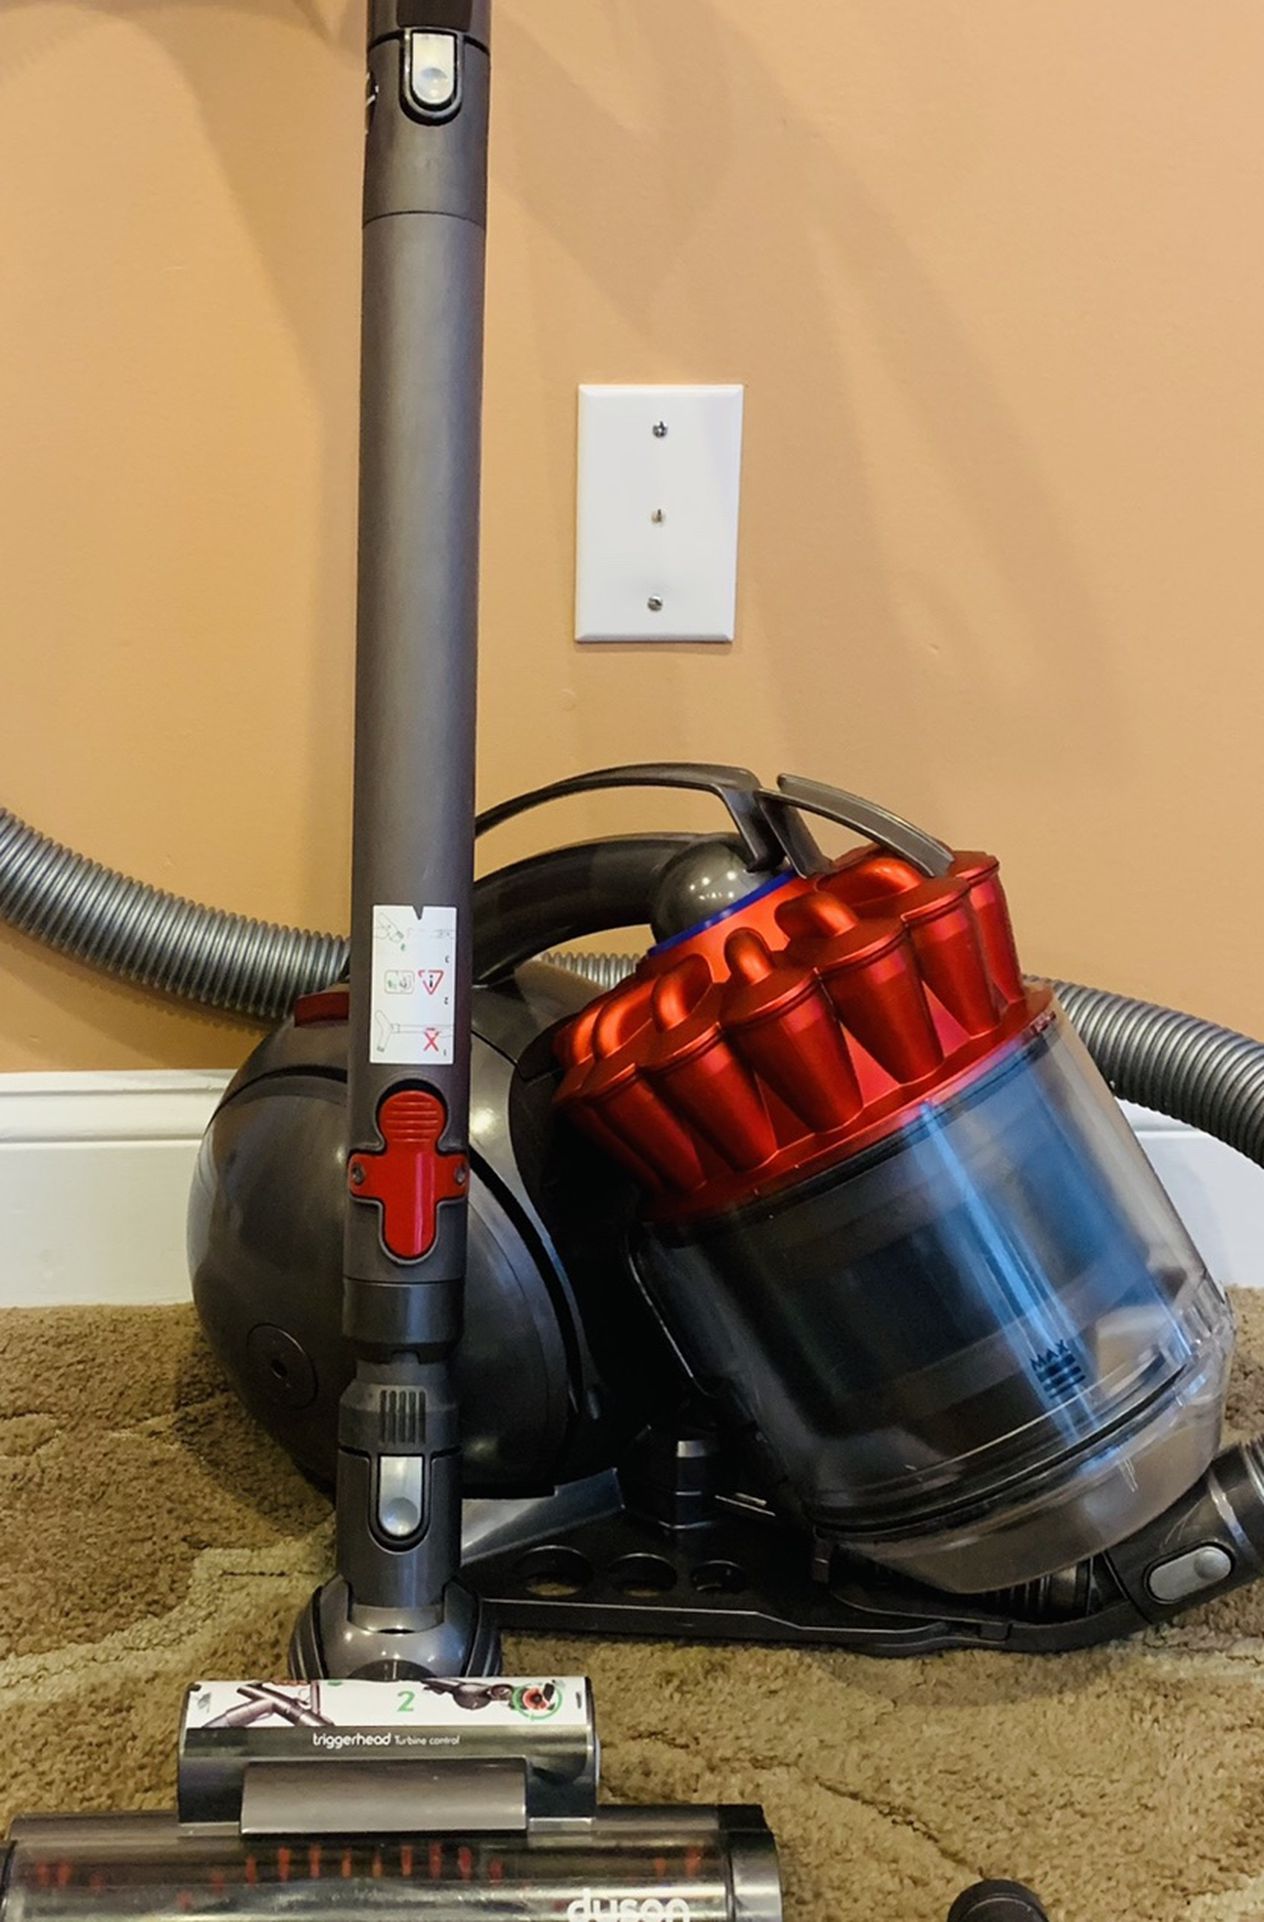 Dyson DC 39 canister vacuum cleaner